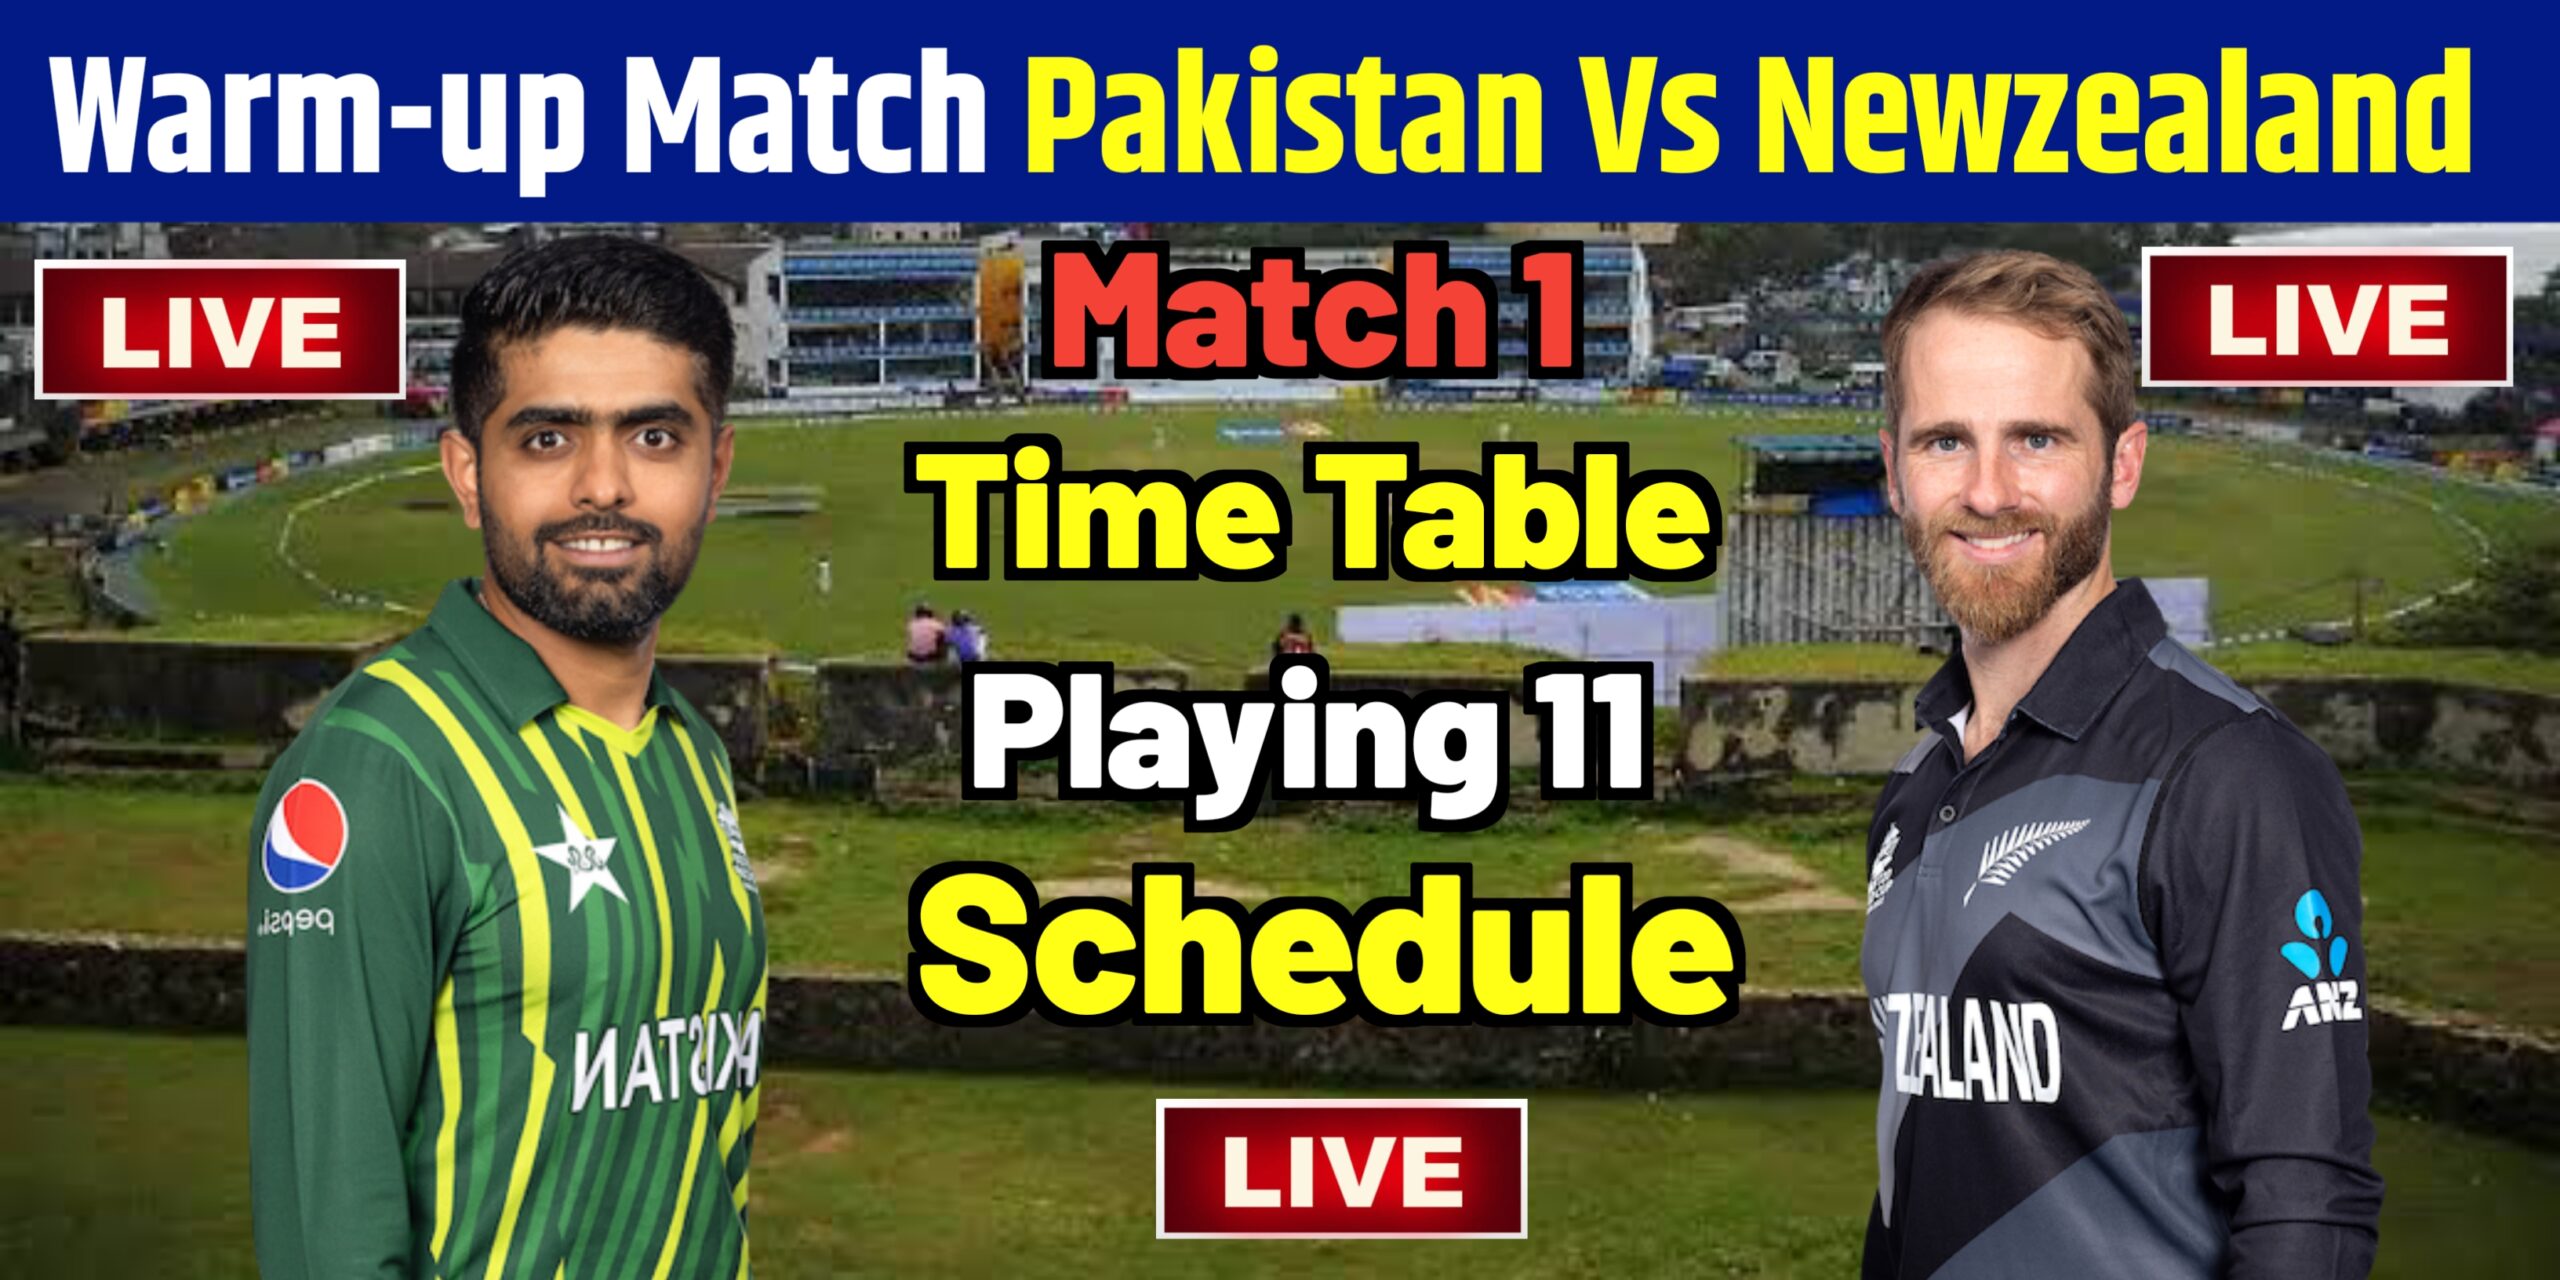 PAK vs NZ Warm-up Match Cricket Worldcup Pakistan Warm-up Schedule, Time, Playing 11, Live